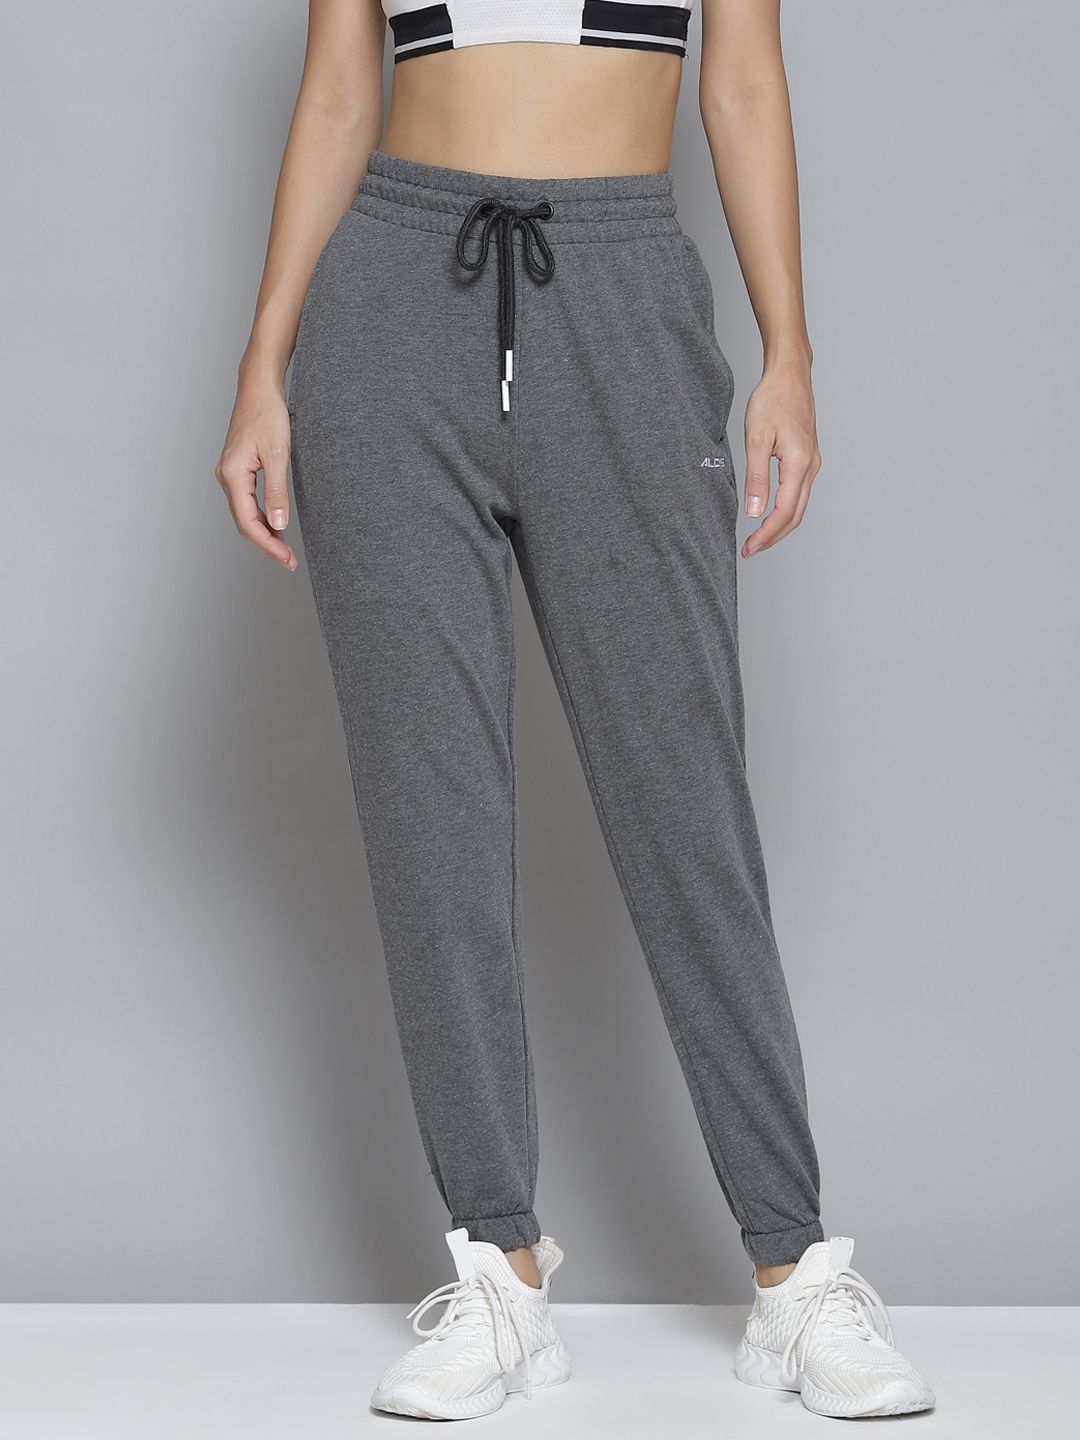 Alcis Women Solid Charcoal Grey Joggers Price in India